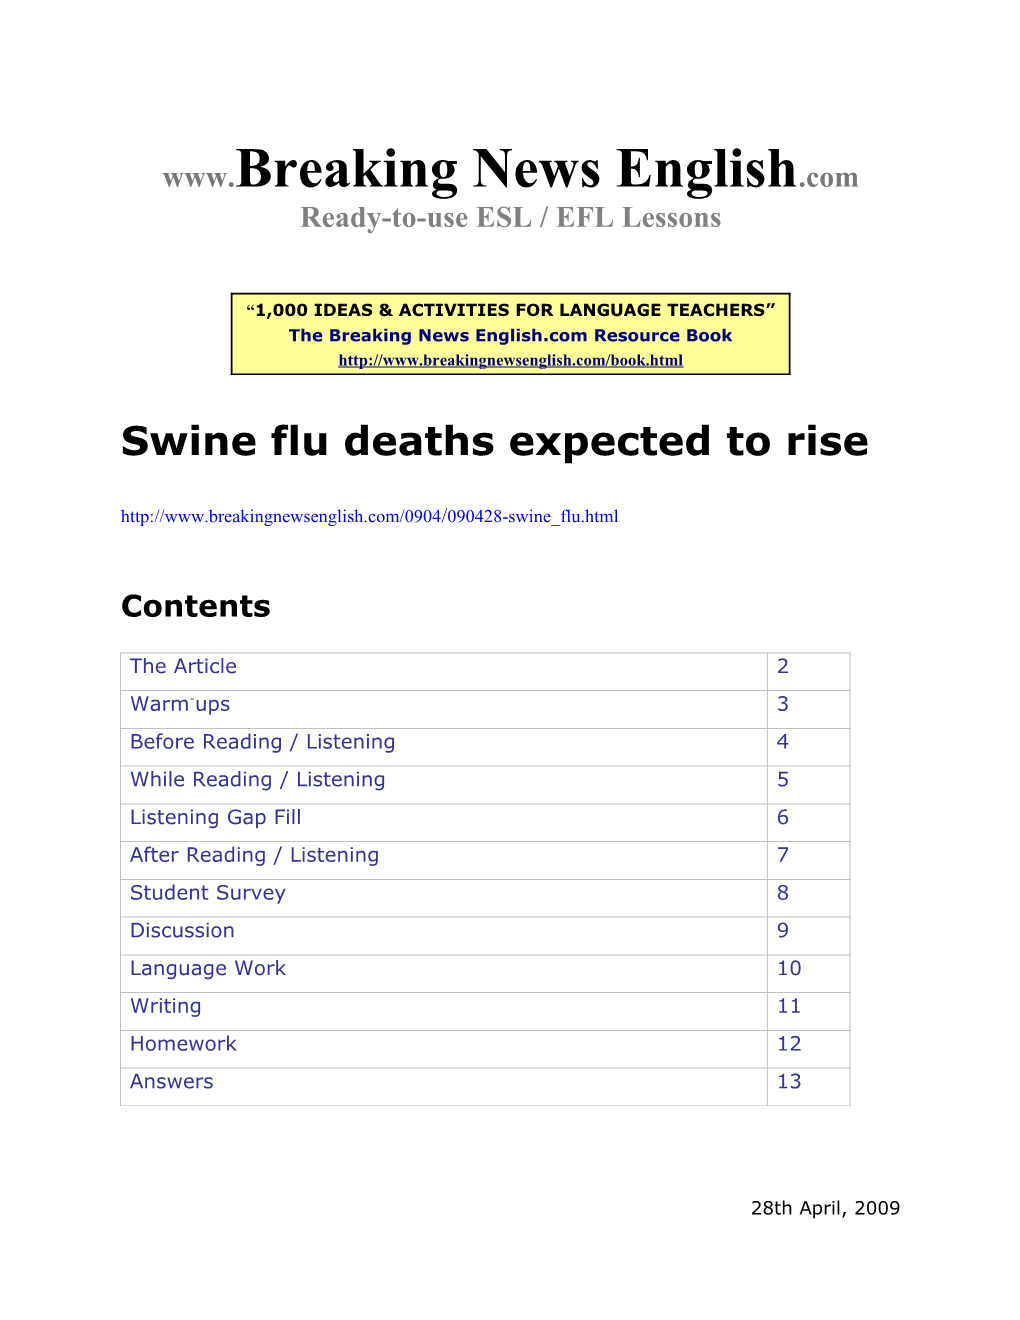 ESL Lesson: Swine Flu Deaths Expected to Rise